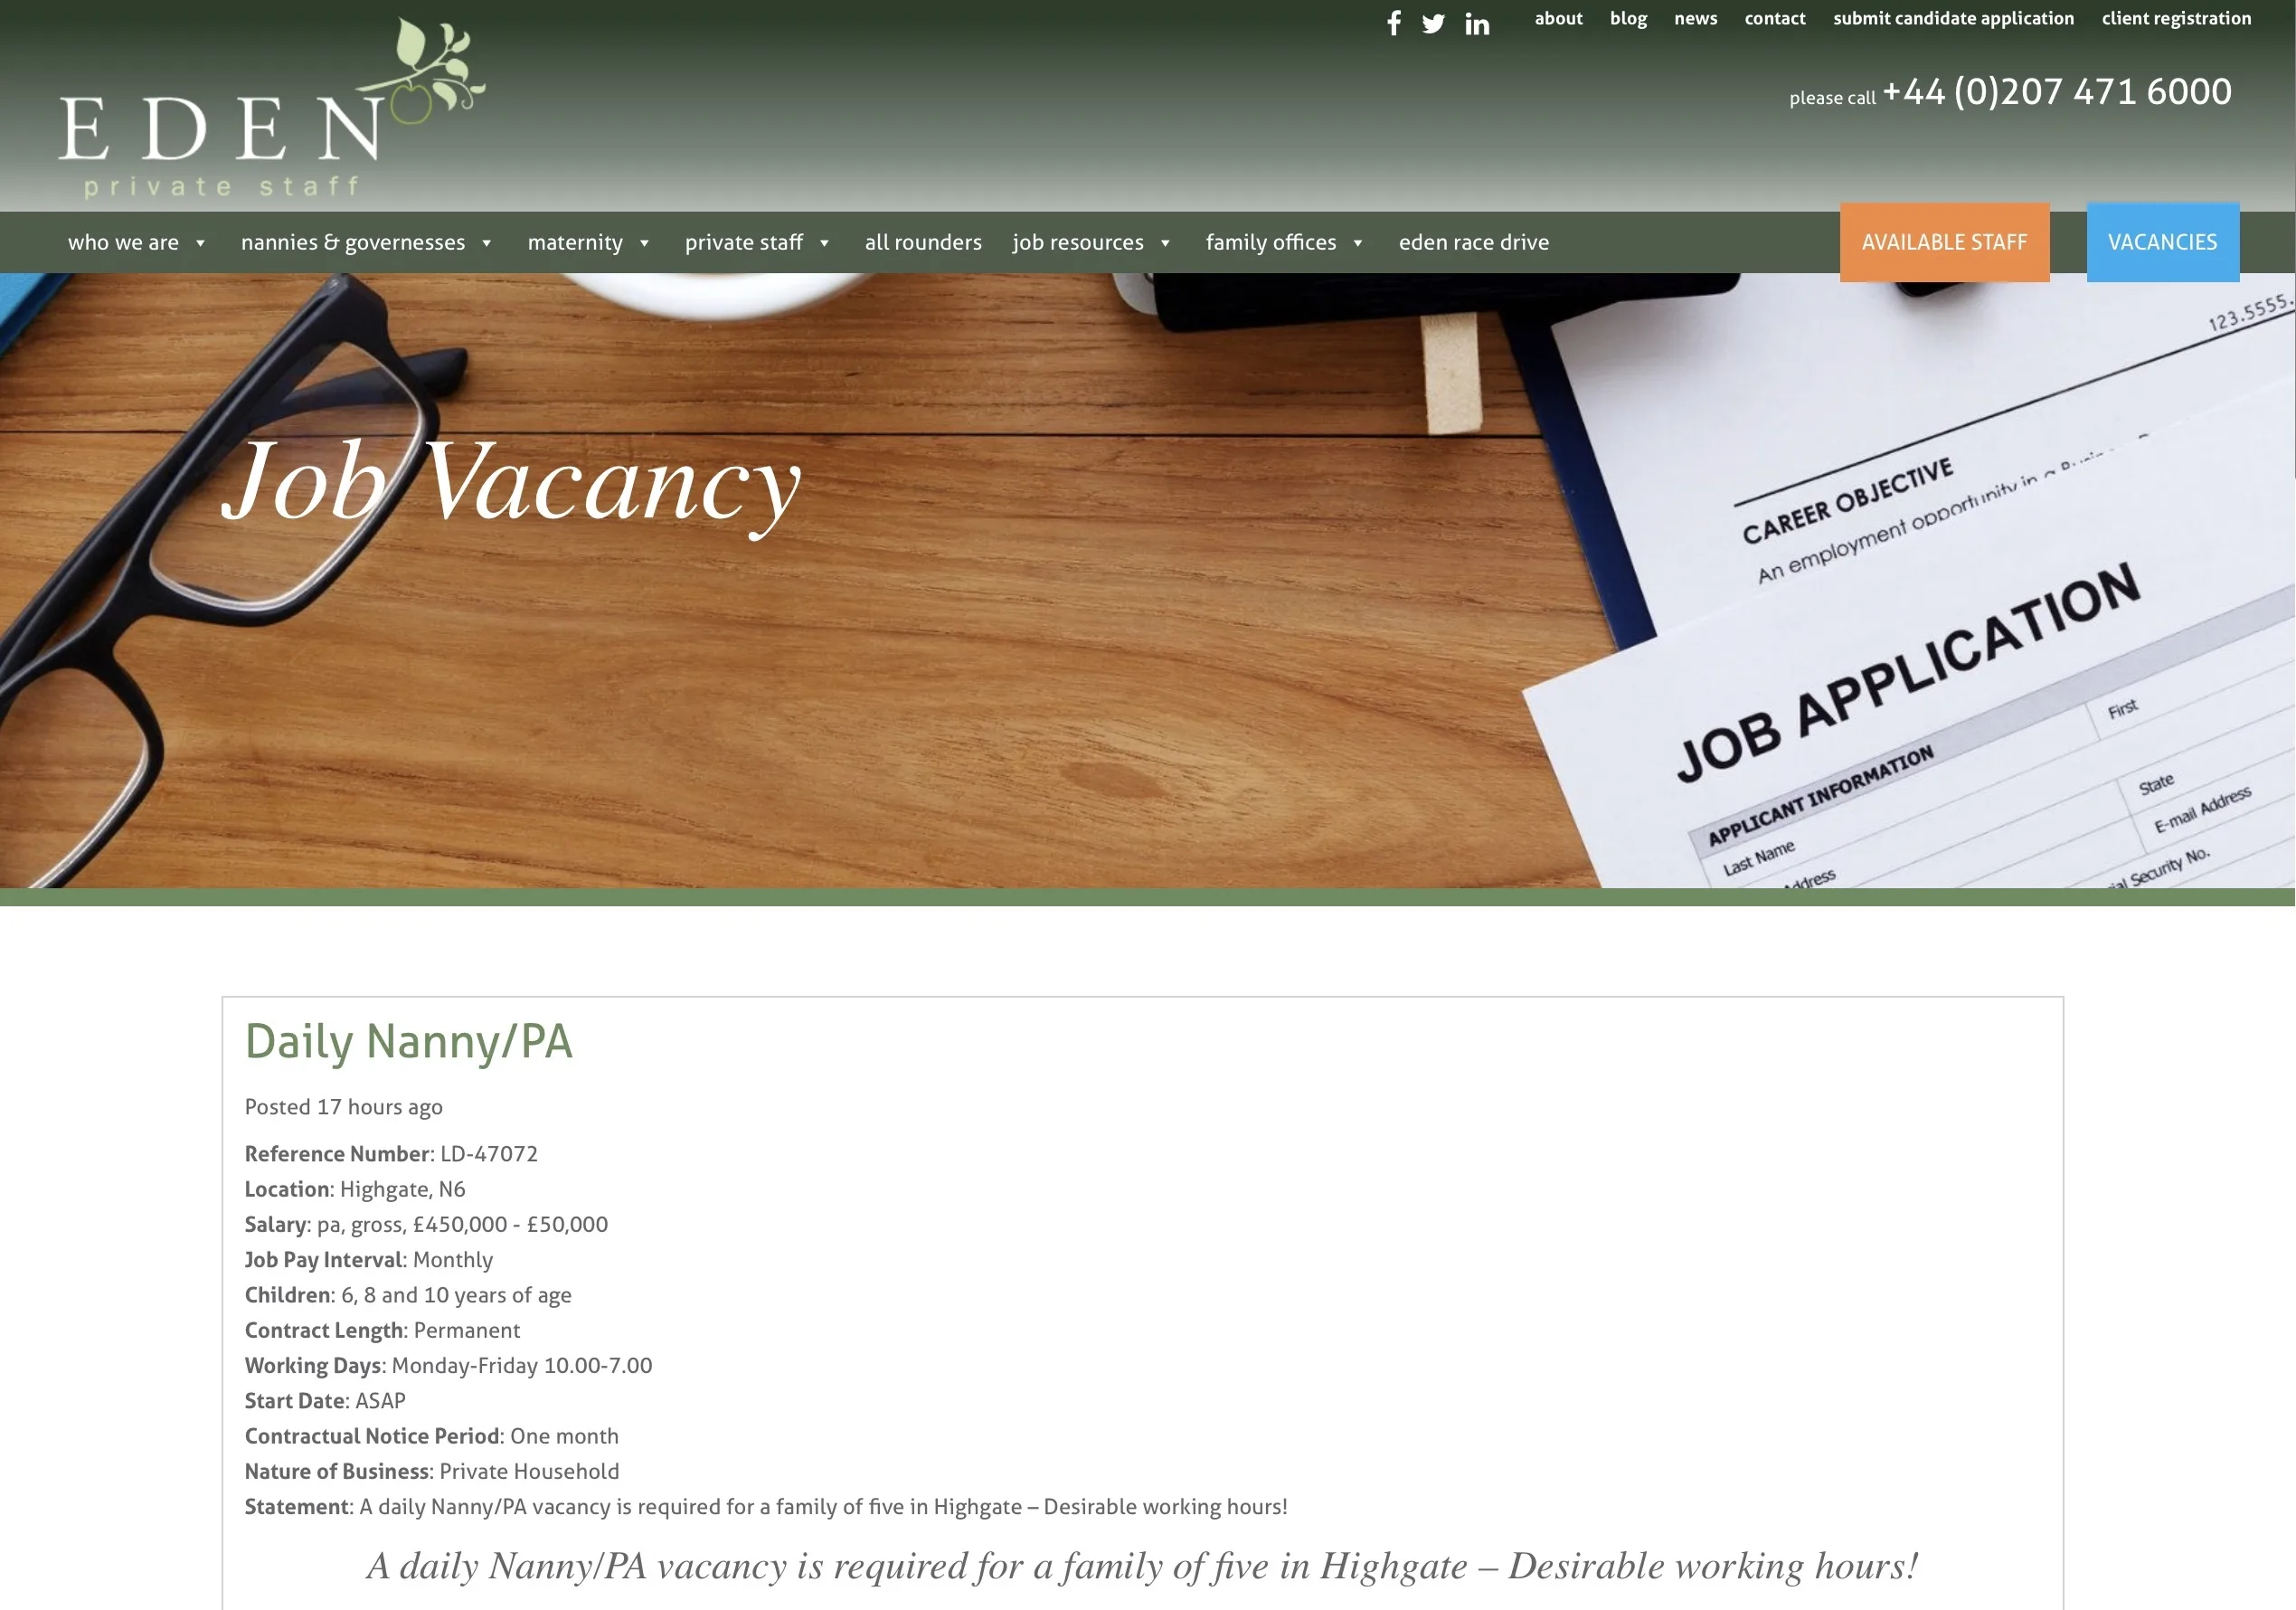 The job description for the nanny/PA position is being advertised by Eden Private Staff.